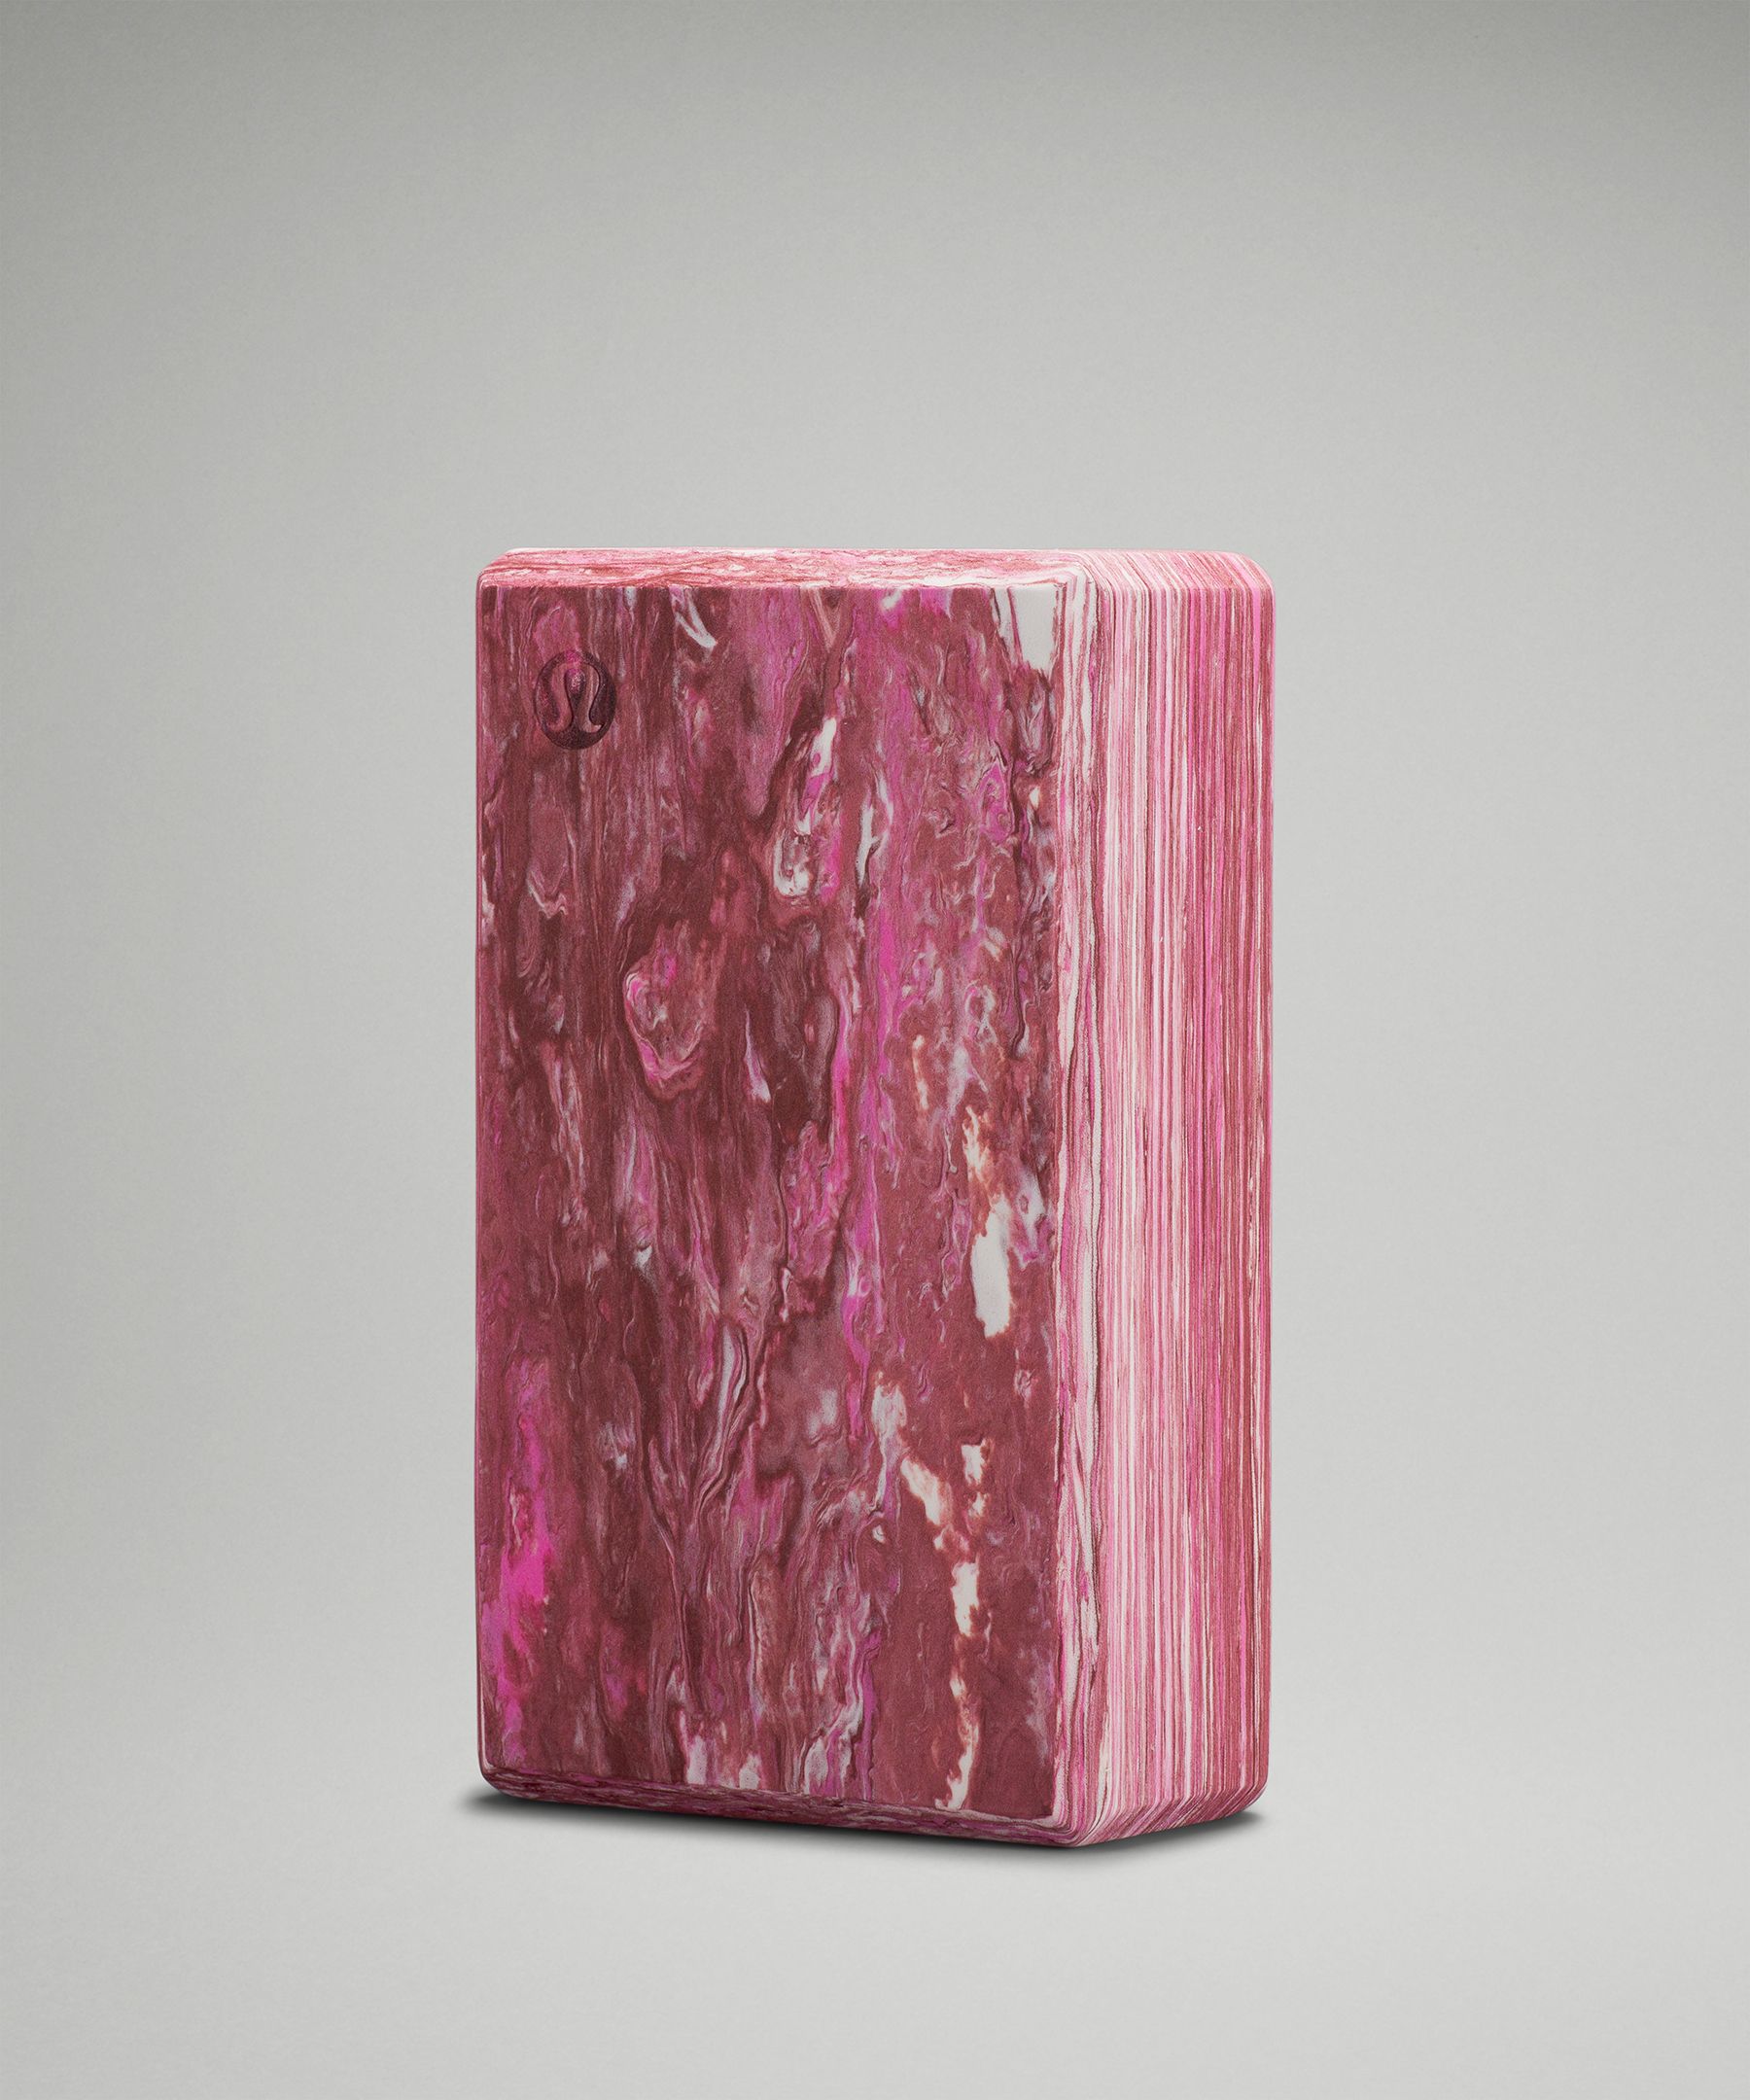 Lululemon Lift And Lengthen Yoga Block Marbled In Pink